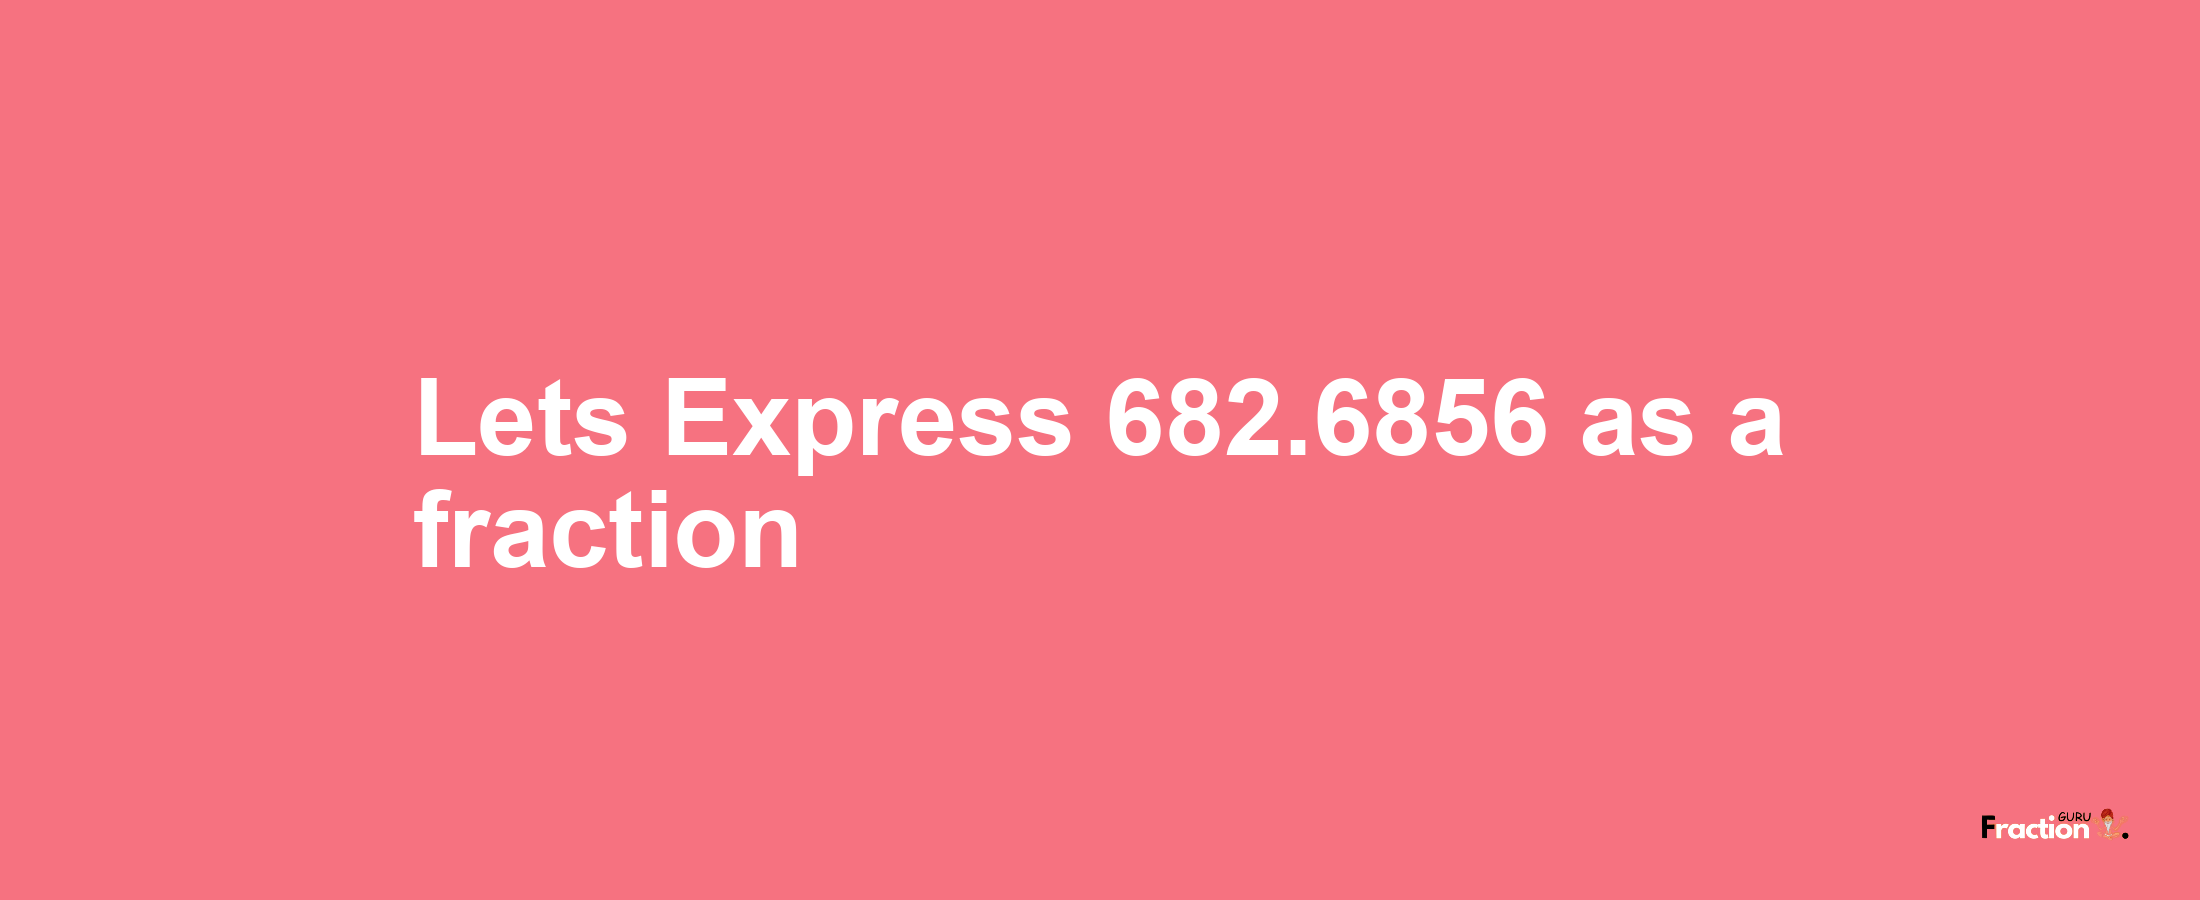 Lets Express 682.6856 as afraction